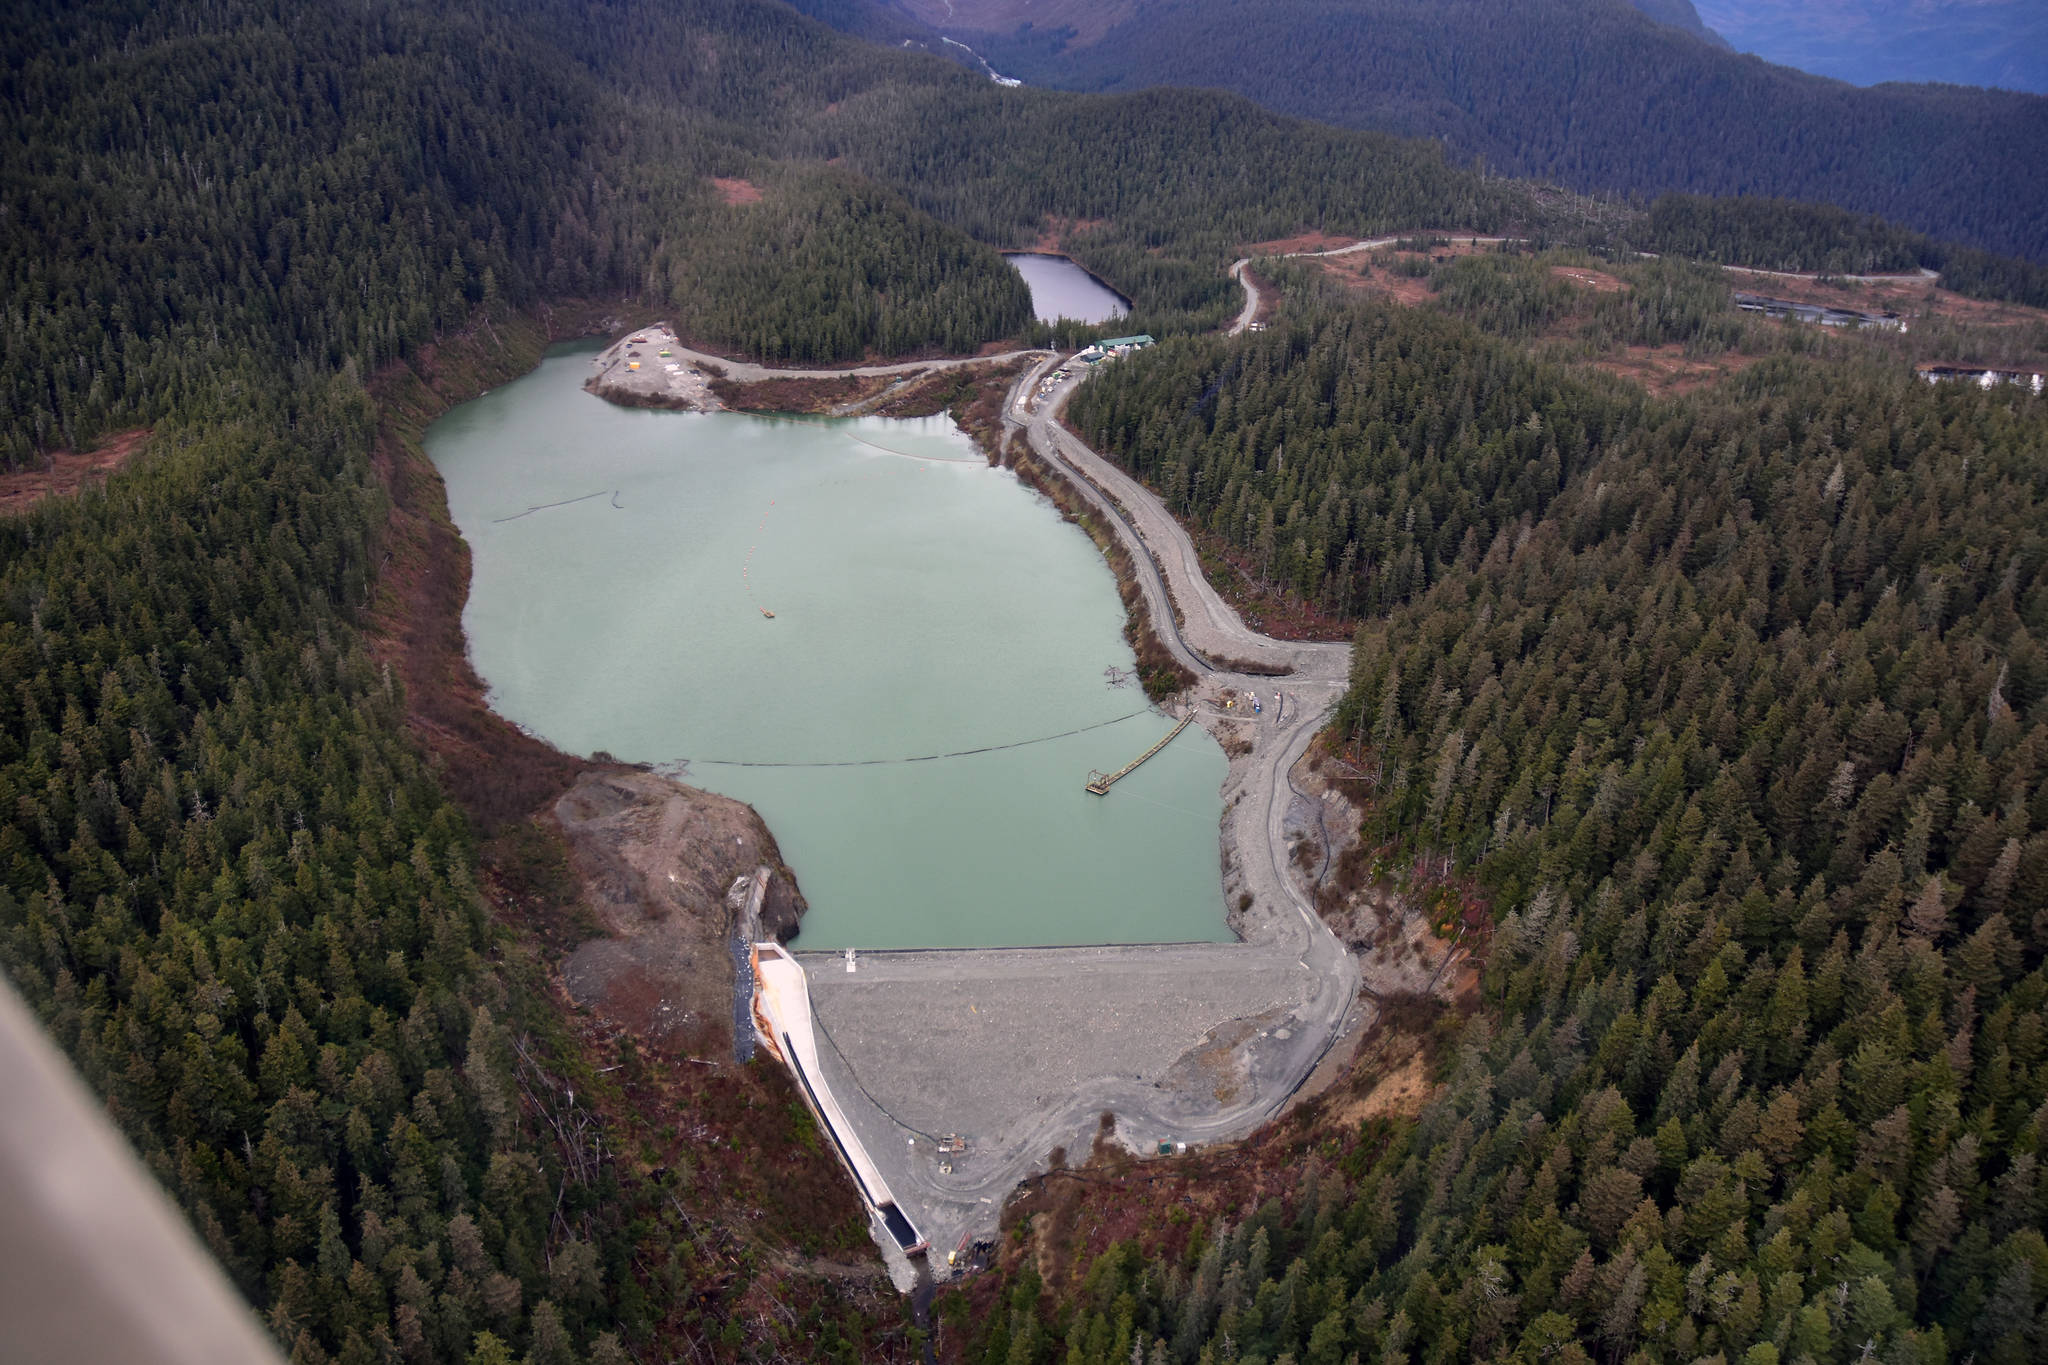 The Tailings Treatment Facility and Upper Slate Lake at the Kensington Mine on Monday, Oct. 14, 2019. The mine’s owner Coeur Alaska wants to expand the life of Kengsington by at least 10 years which will require expansion of the lake which is a concern to environmentalists. (Peter Segall / Juneau Empire File)